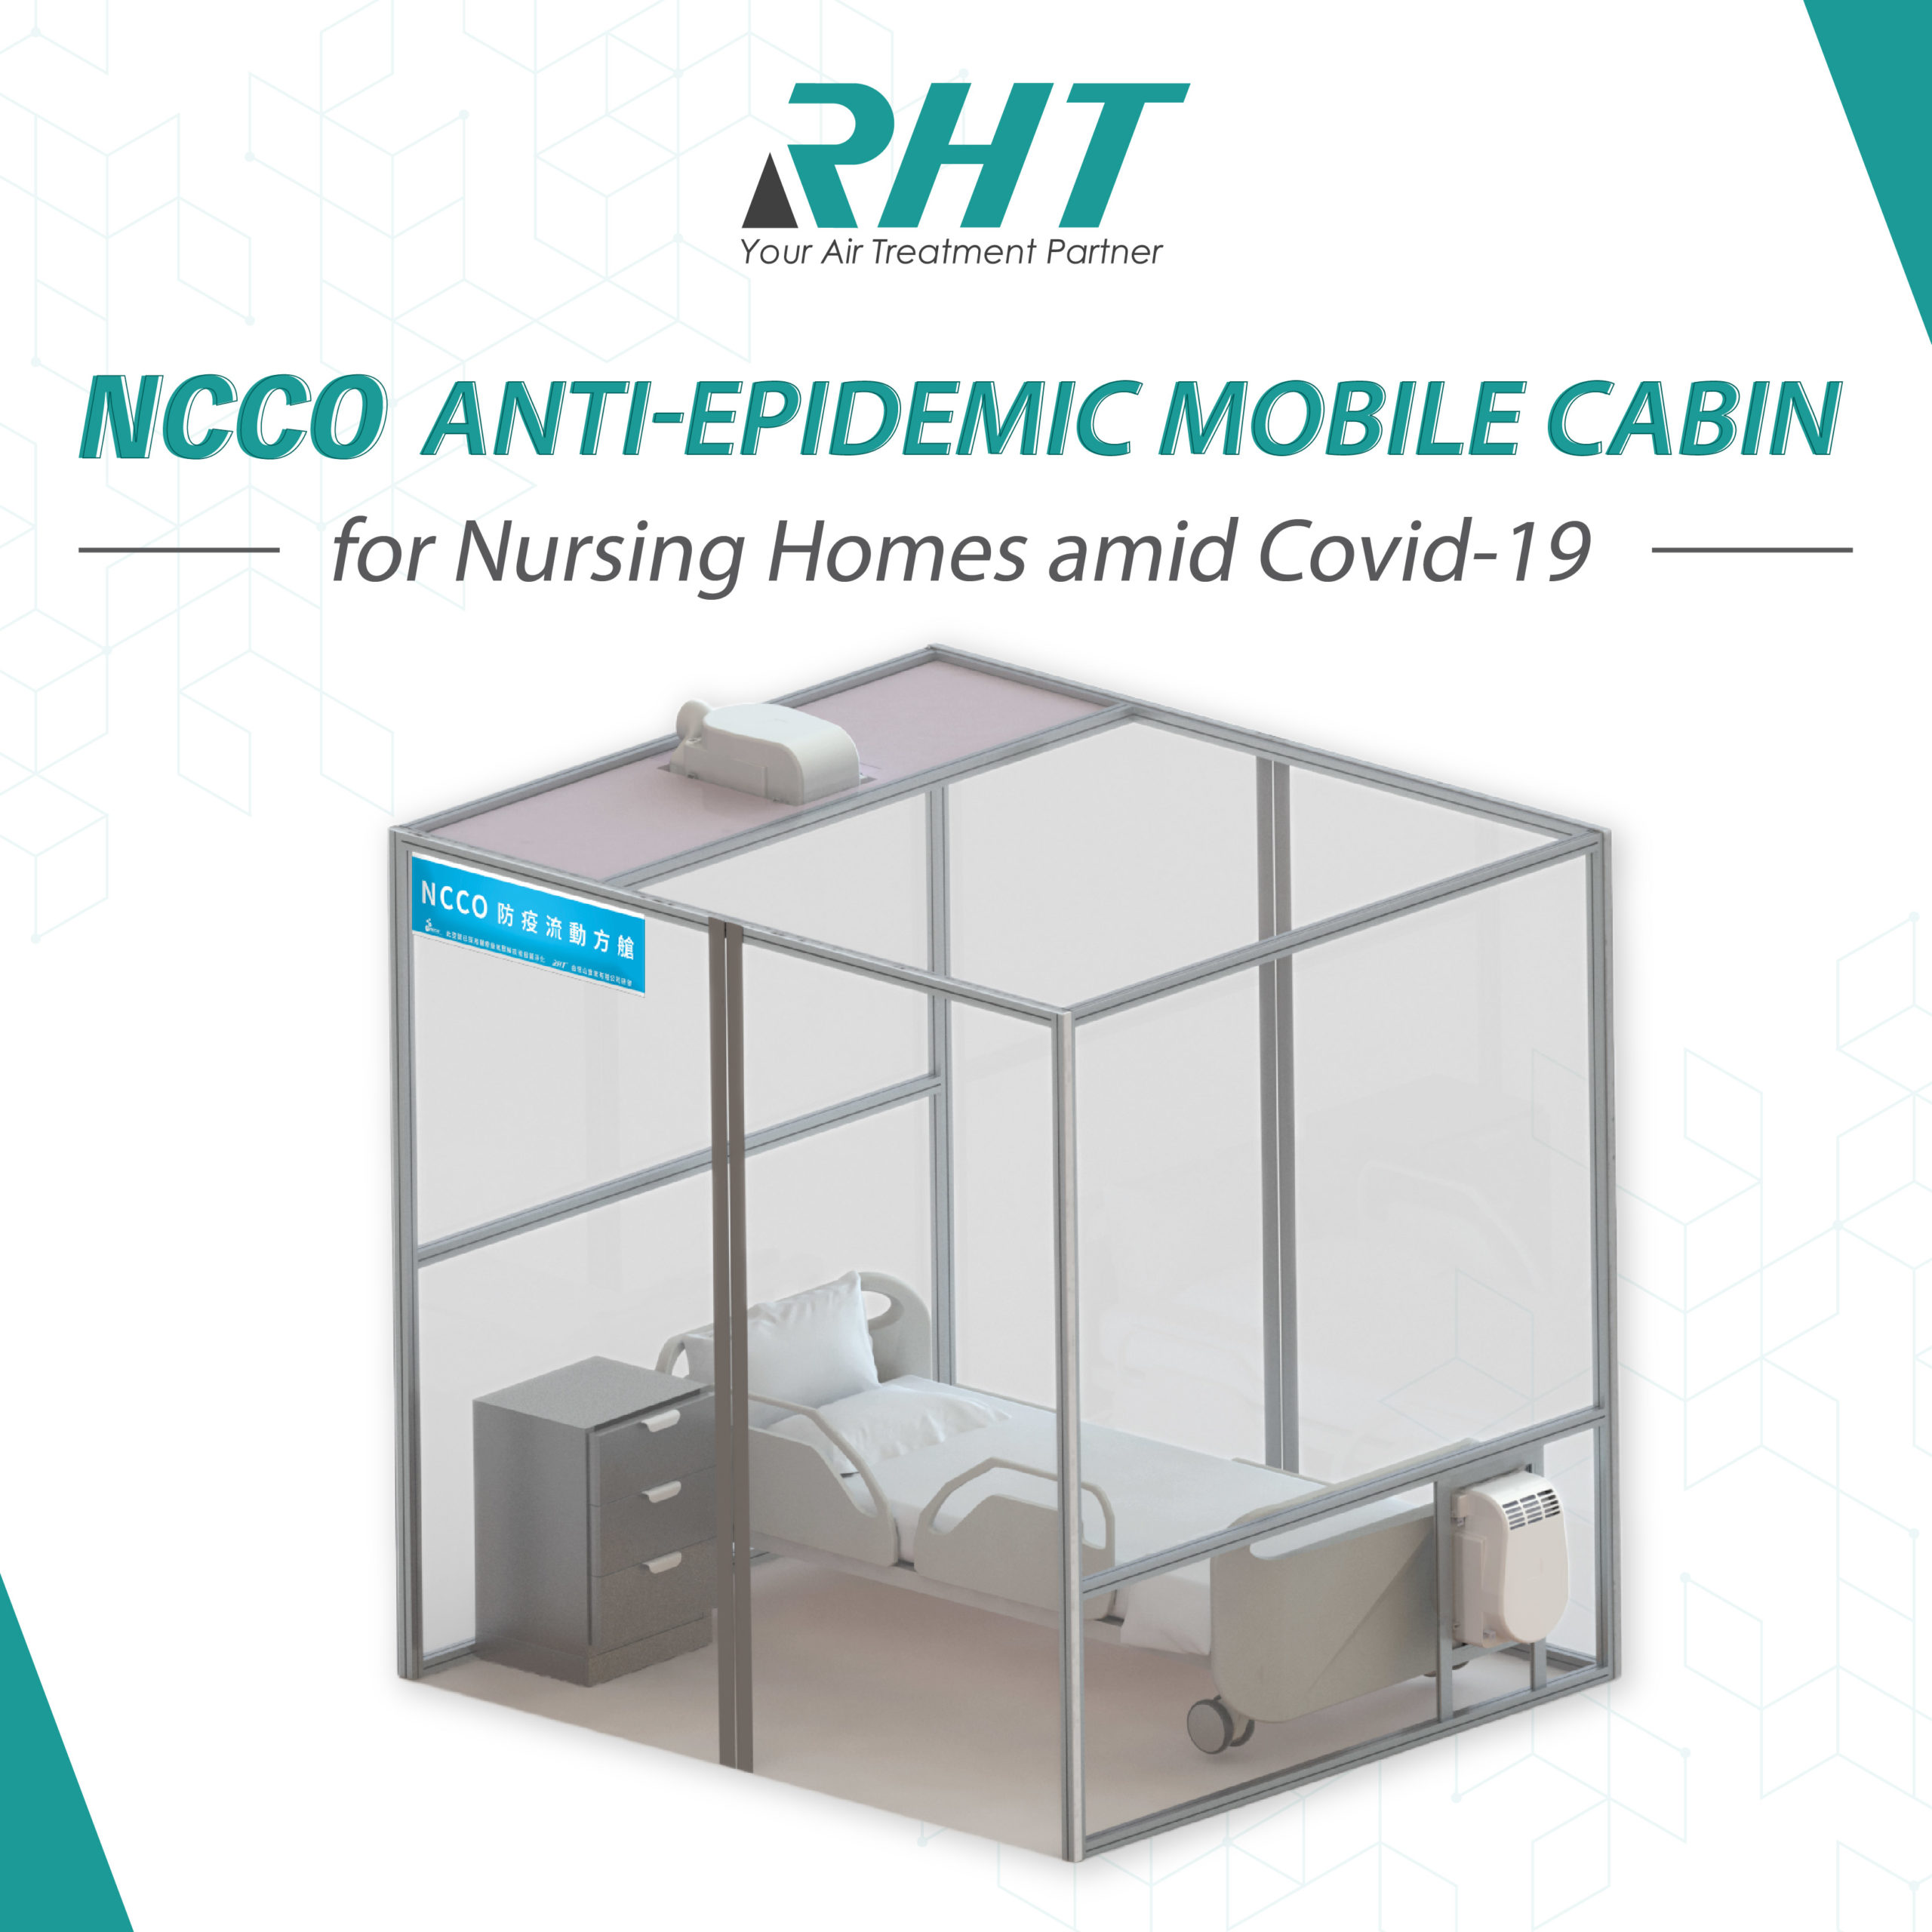 Sustainable solution –  “NCCO Anti-Epidemic Mobile Cabin” for Nursing Homes amid Covid-19